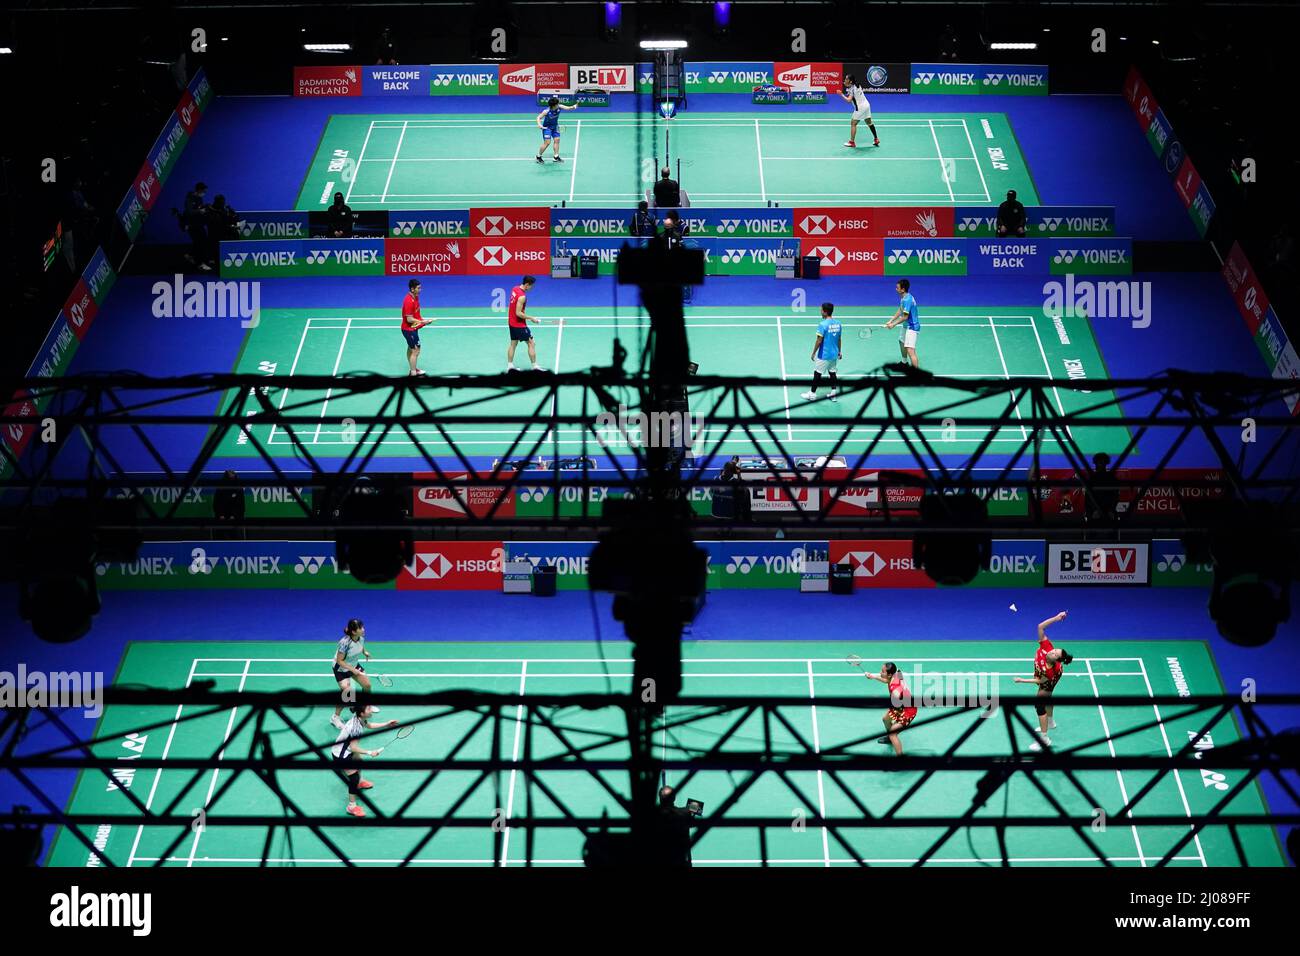 A general view during day two of the YONEX All England Open Badminton Championships at the Utilita Arena Birmingham